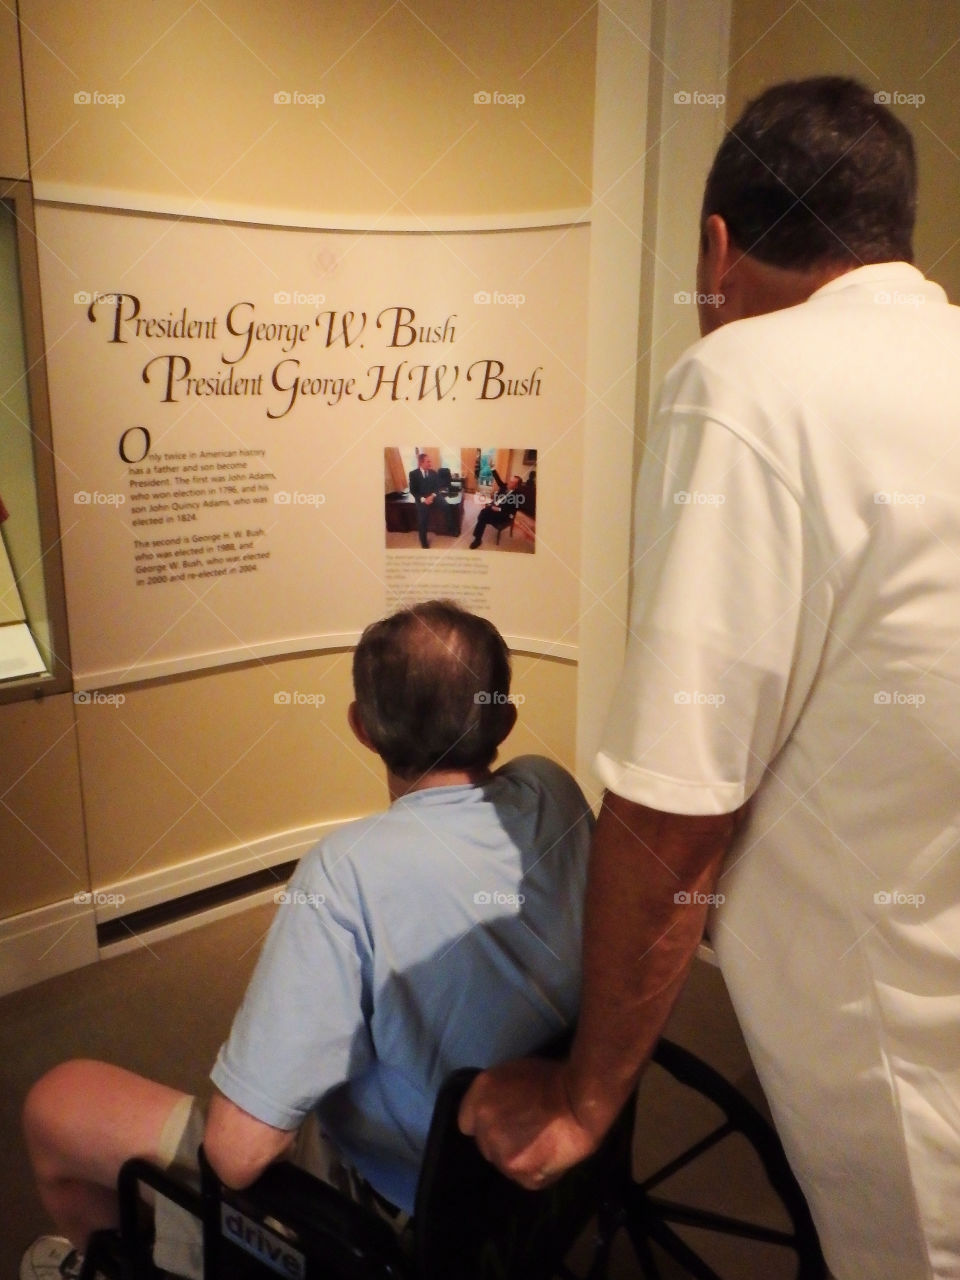 A doting son pushes his elderly father in the Bush Presidential Library in Dallas, TX.